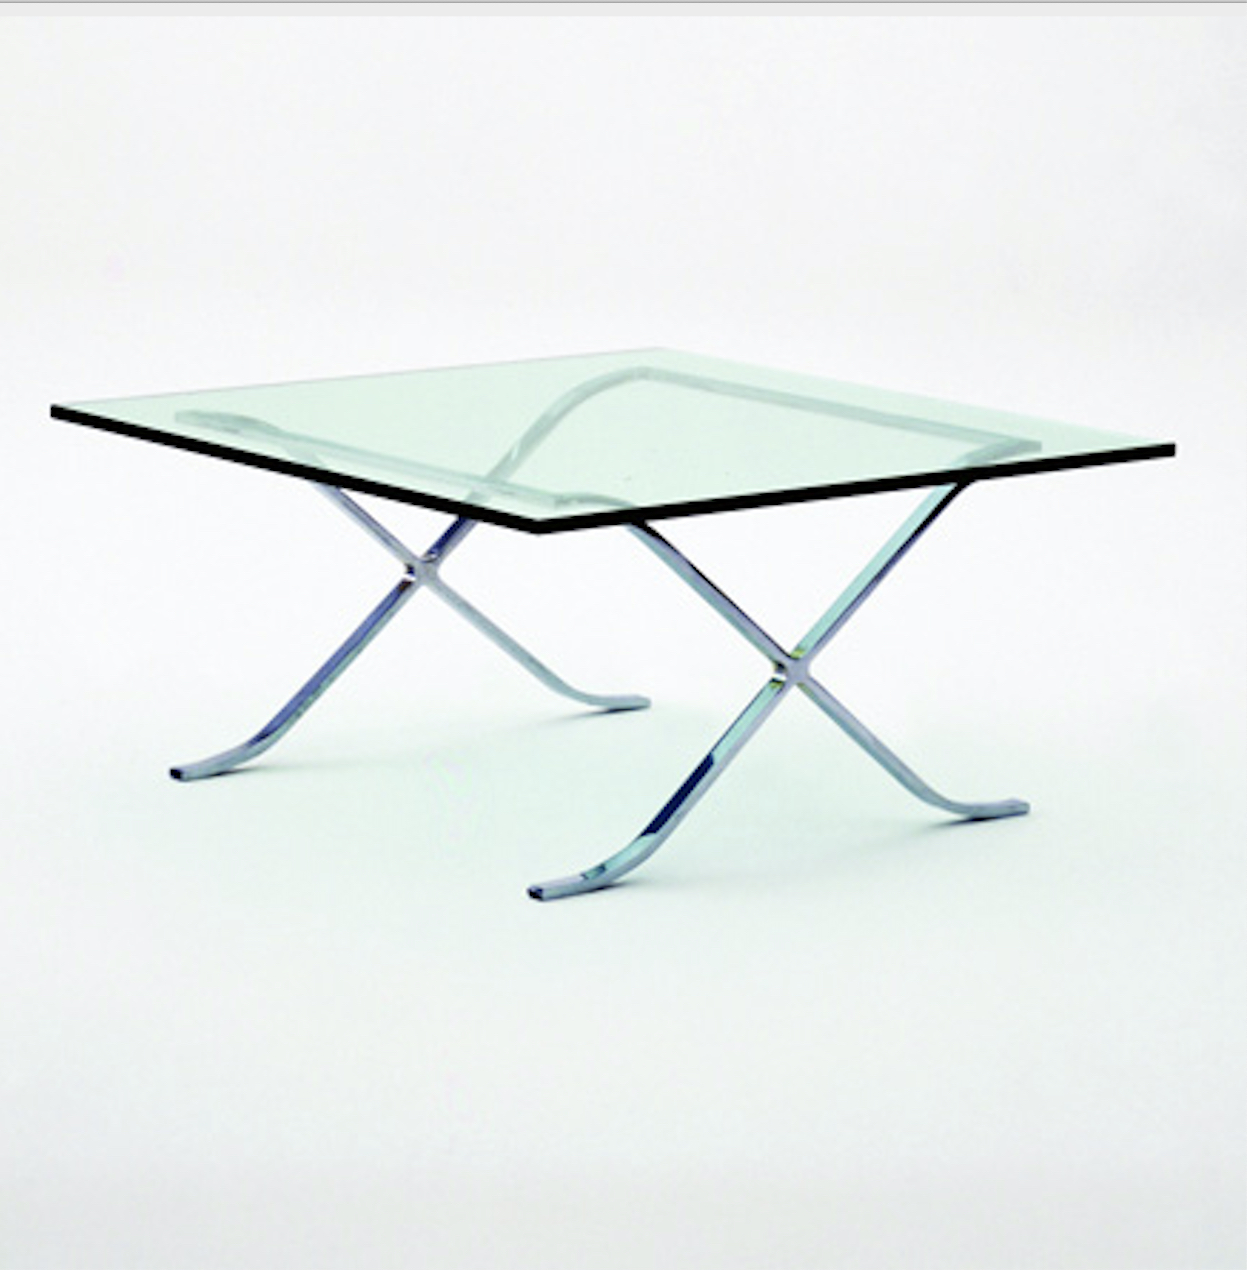 Mies van der Rohe - Coffee table for the german empire pavillon